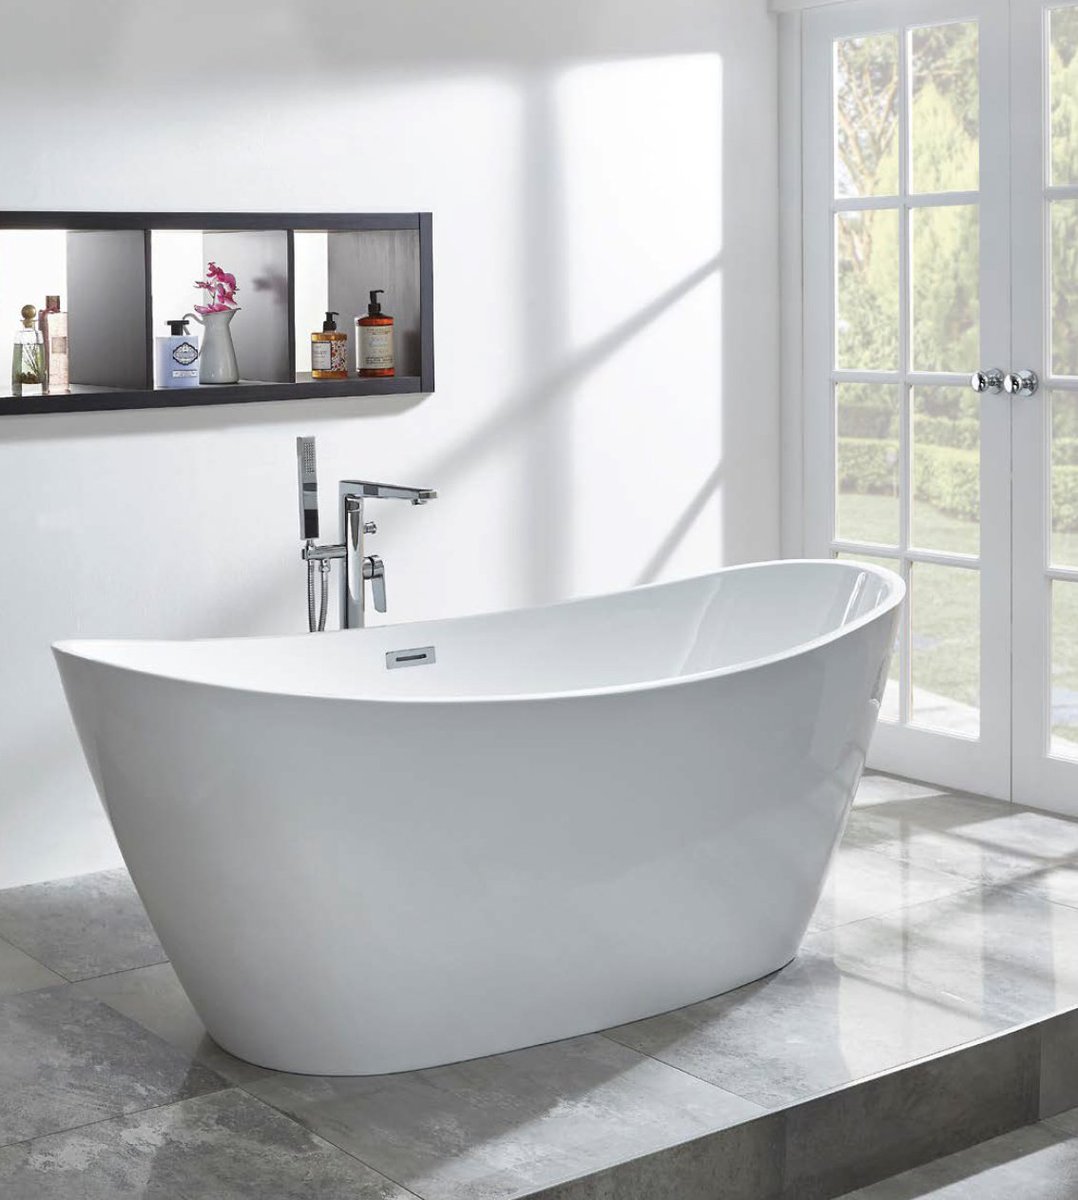 What's better on a cold January night than a long soak in the bath? 🛁

The Michelle acrylic freestanding bath from Phoenix has a capacity of 270 litres and includes a chrome overflow and Klik waste 

#Bathroom #BathroomDesign #BathroomInspiration #FreestandingBath #Bath